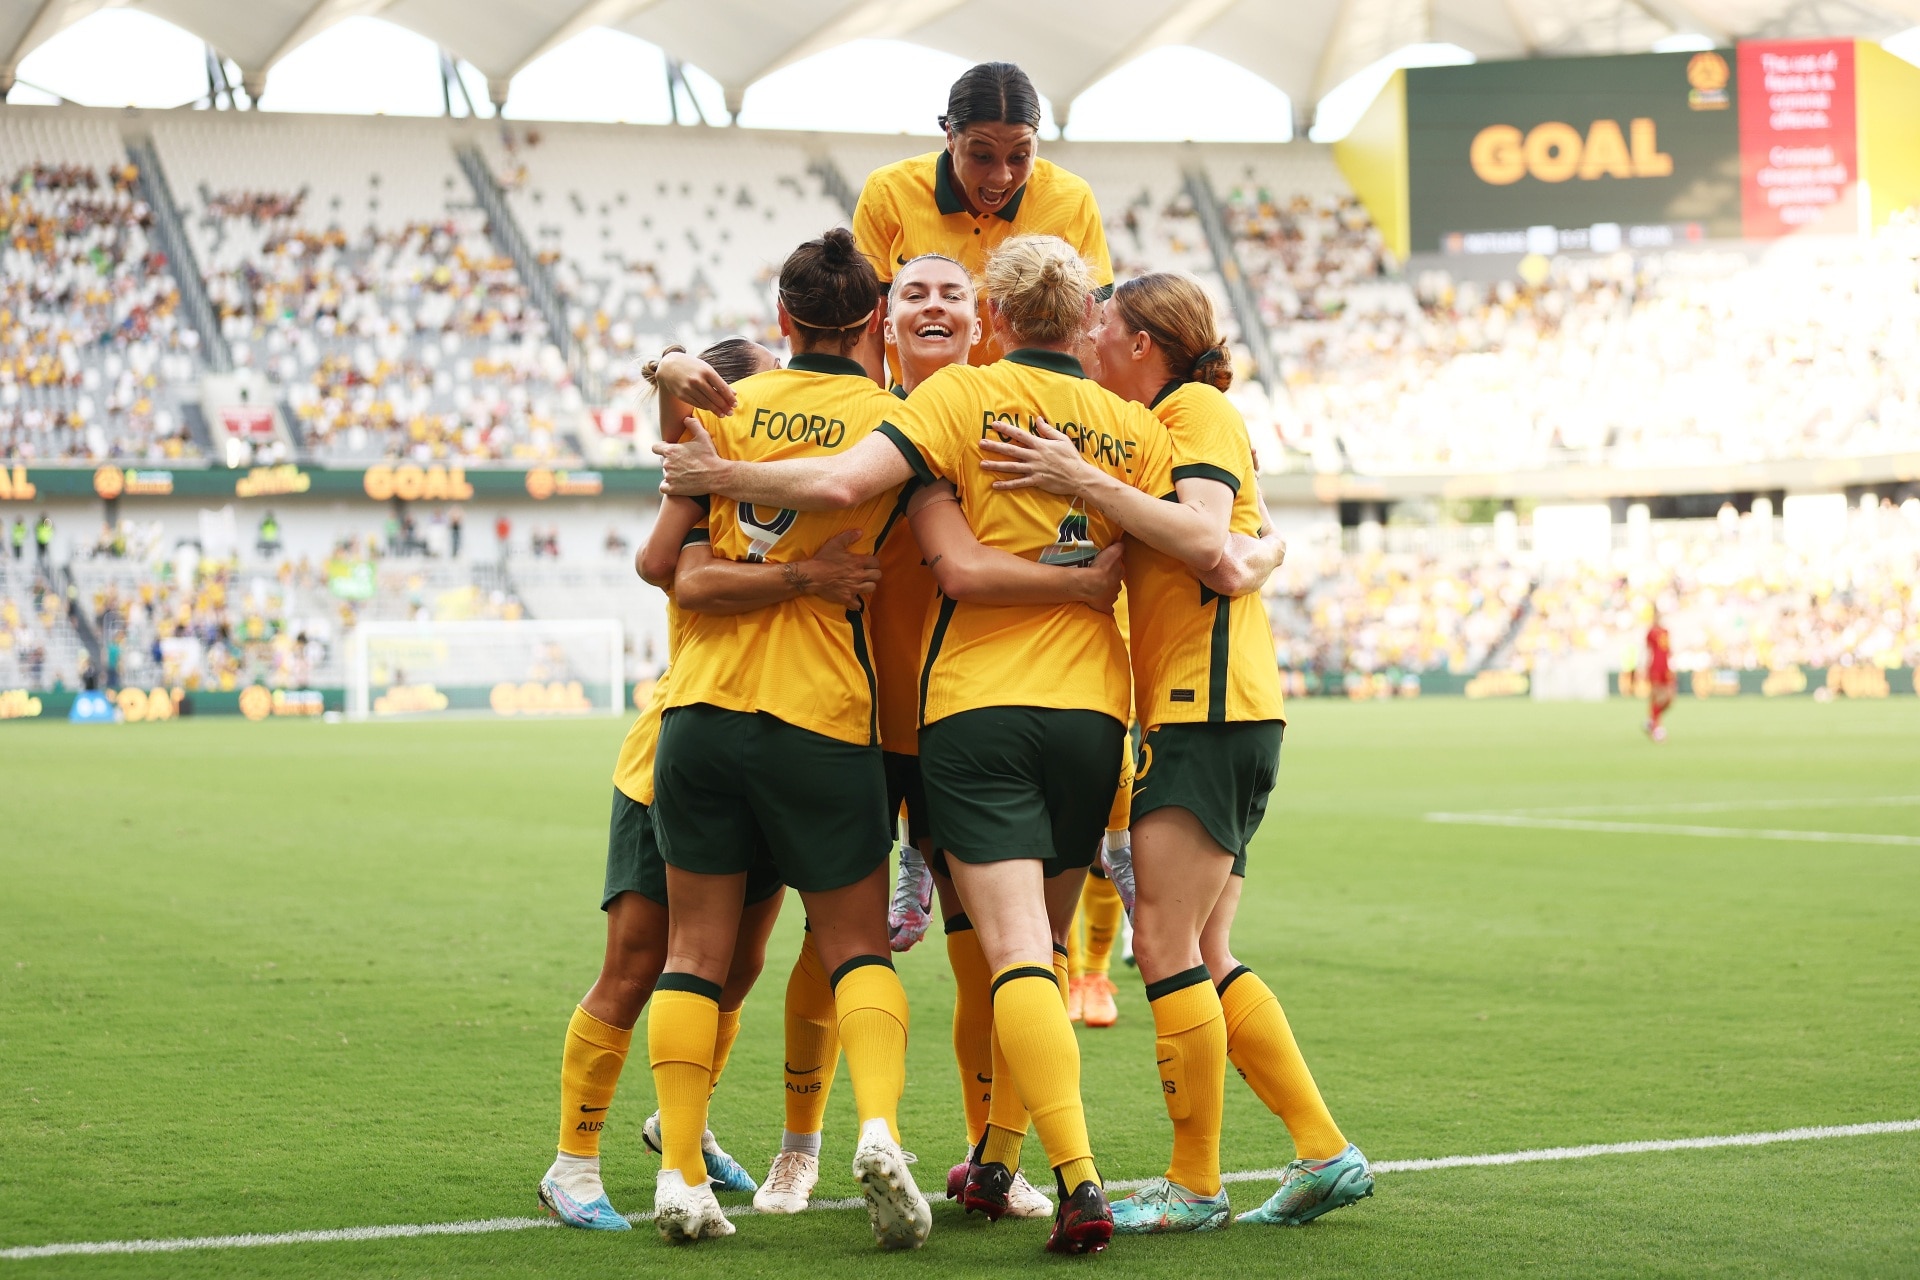 Let's go, Matildas! Vogue supports our national team this historic